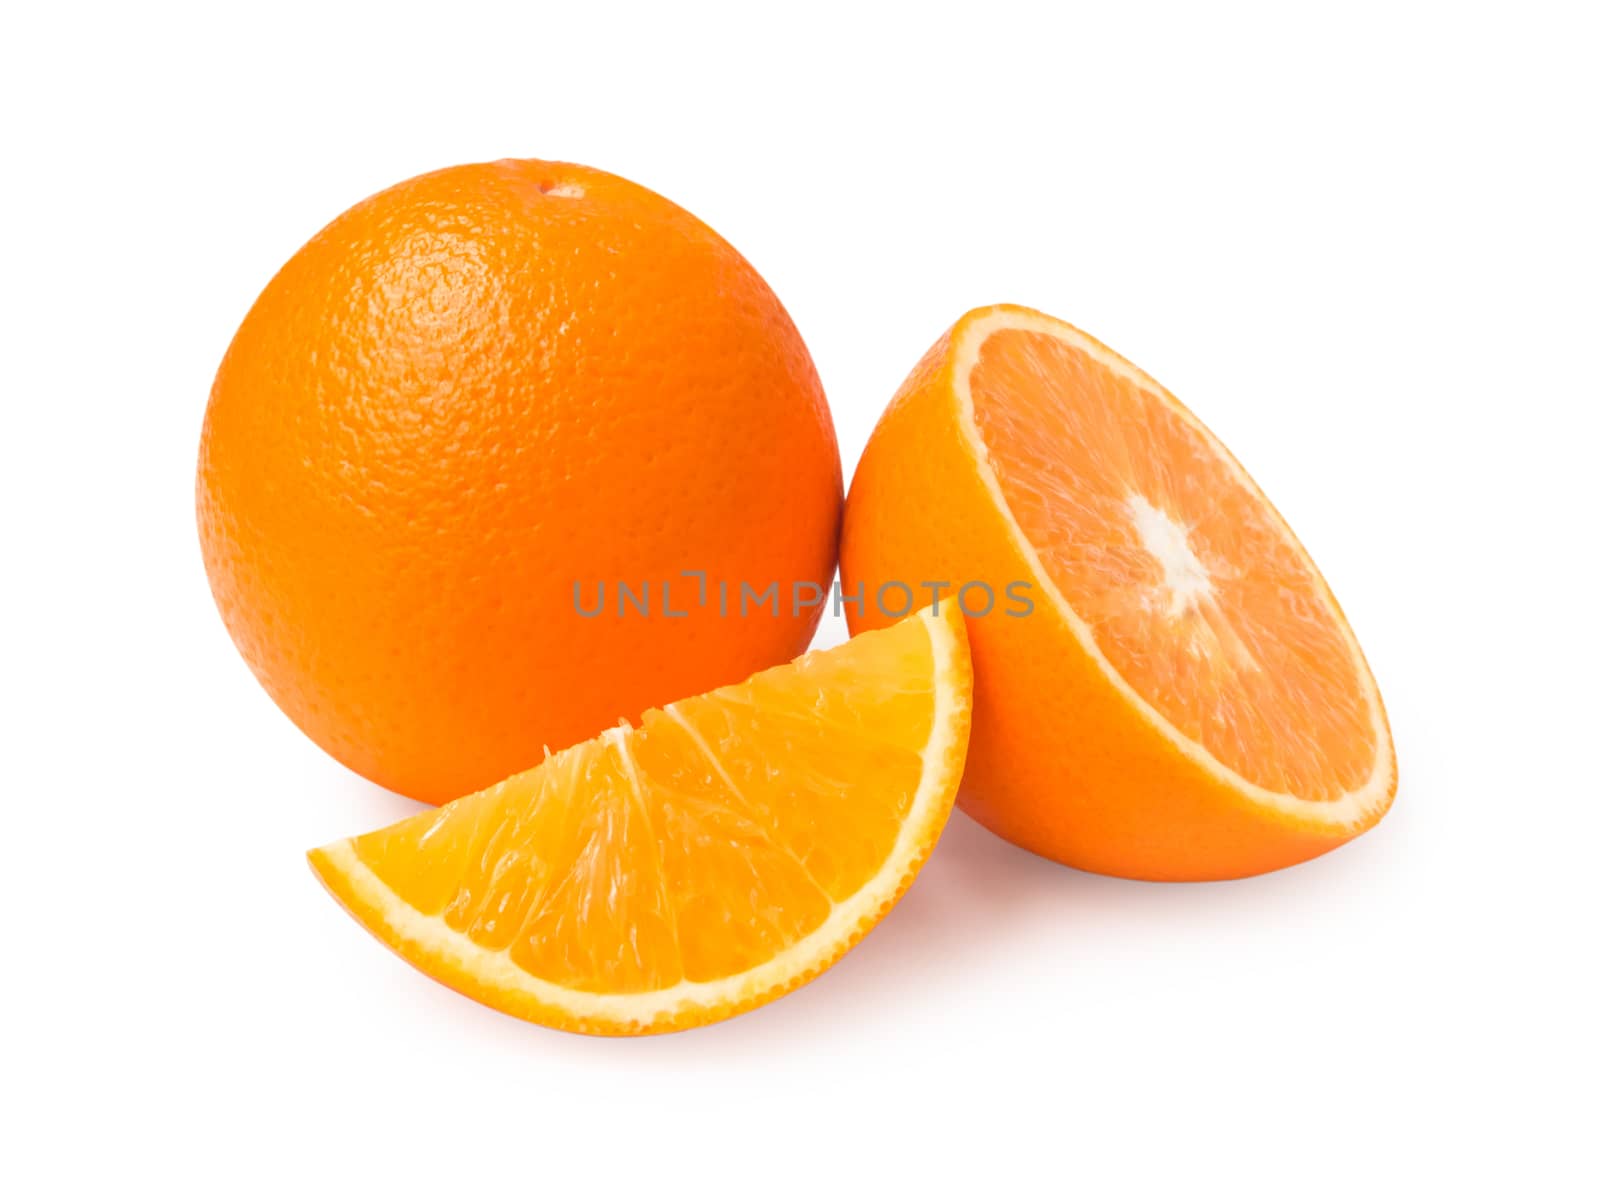 Orange fruit and slice isolated on white background with clippin by pt.pongsak@gmail.com